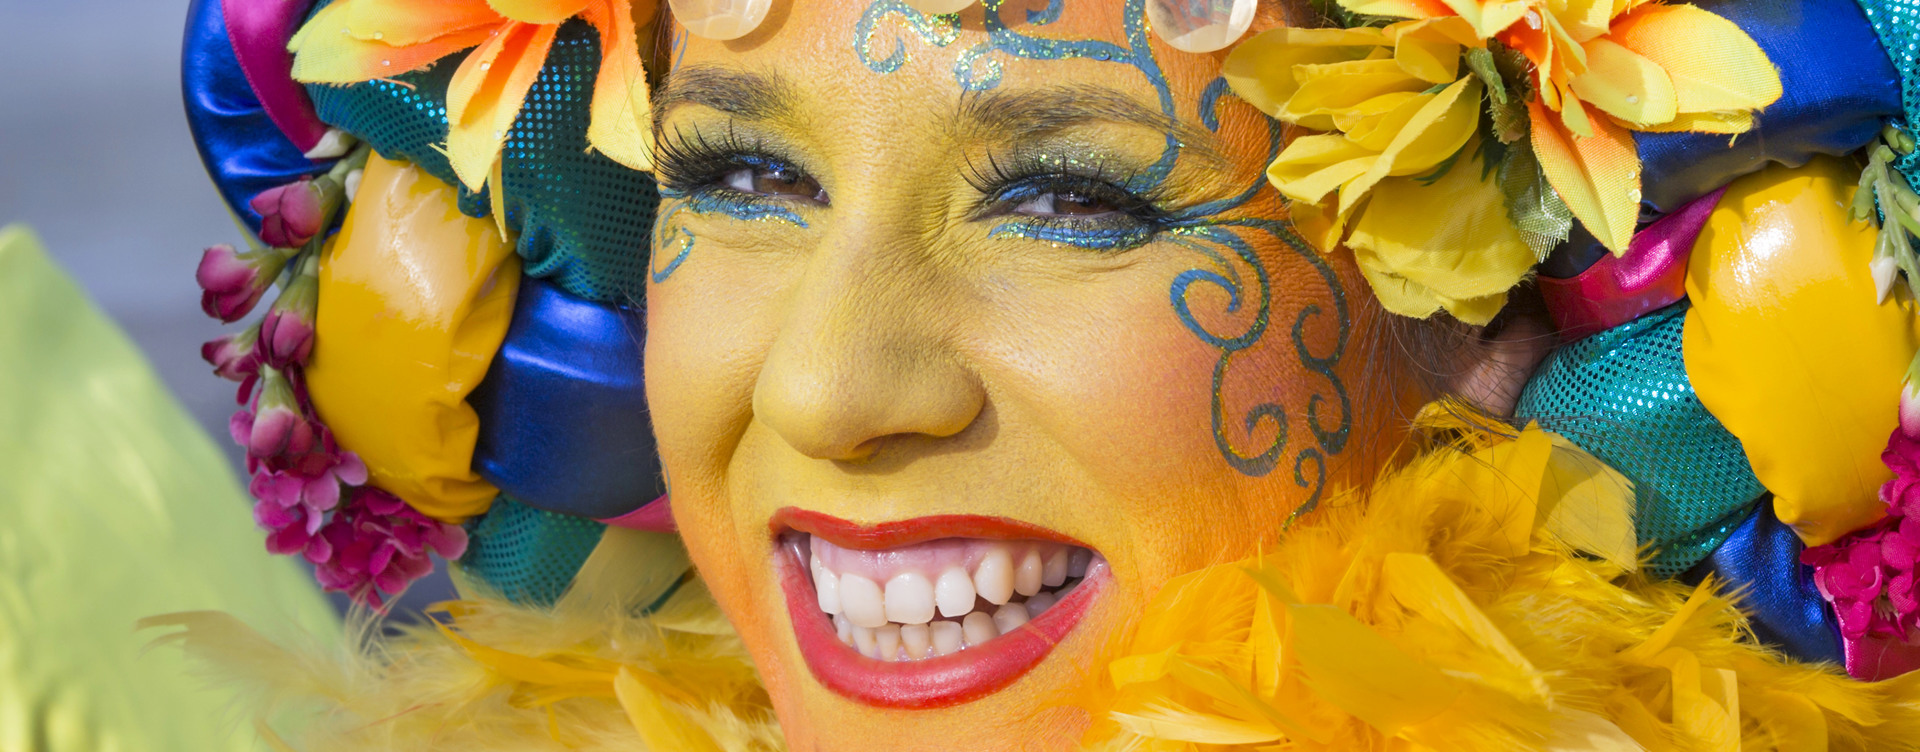 Experience un unforgettable carnival in Maastricht:
the biggest carnival city of the Netherlands